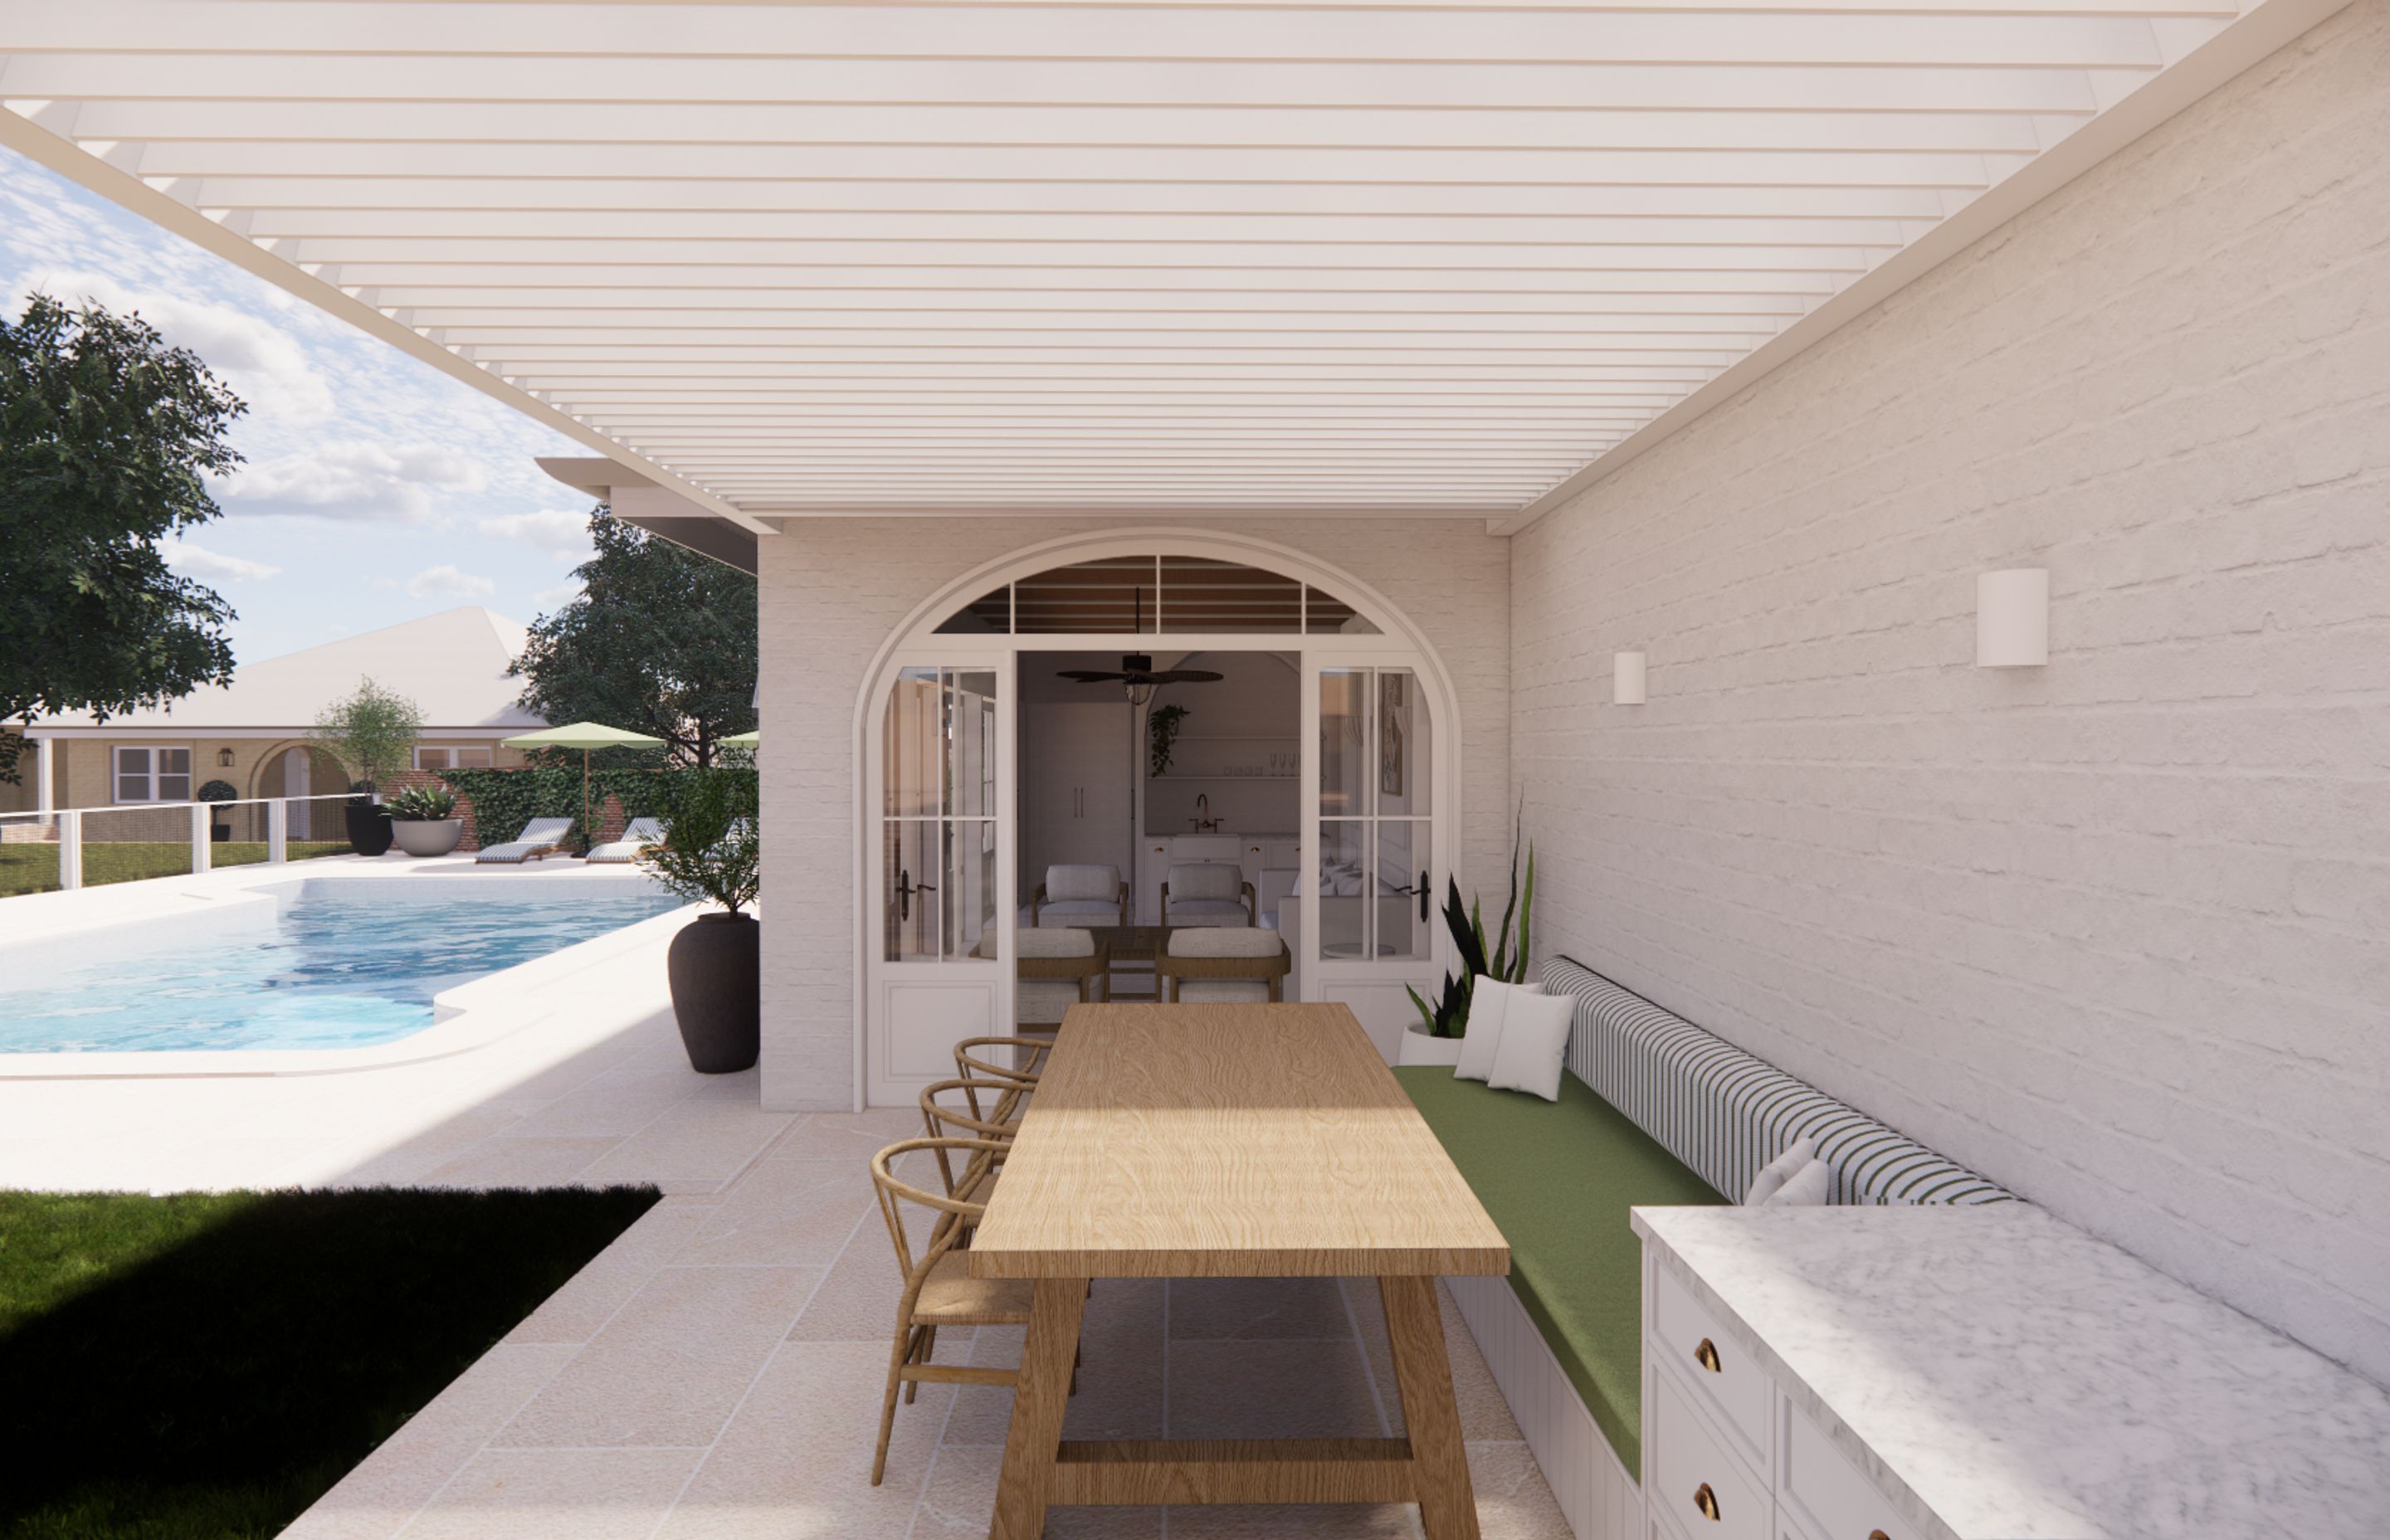 Copy-of-POOL-HOUSE-VIEW-7.png